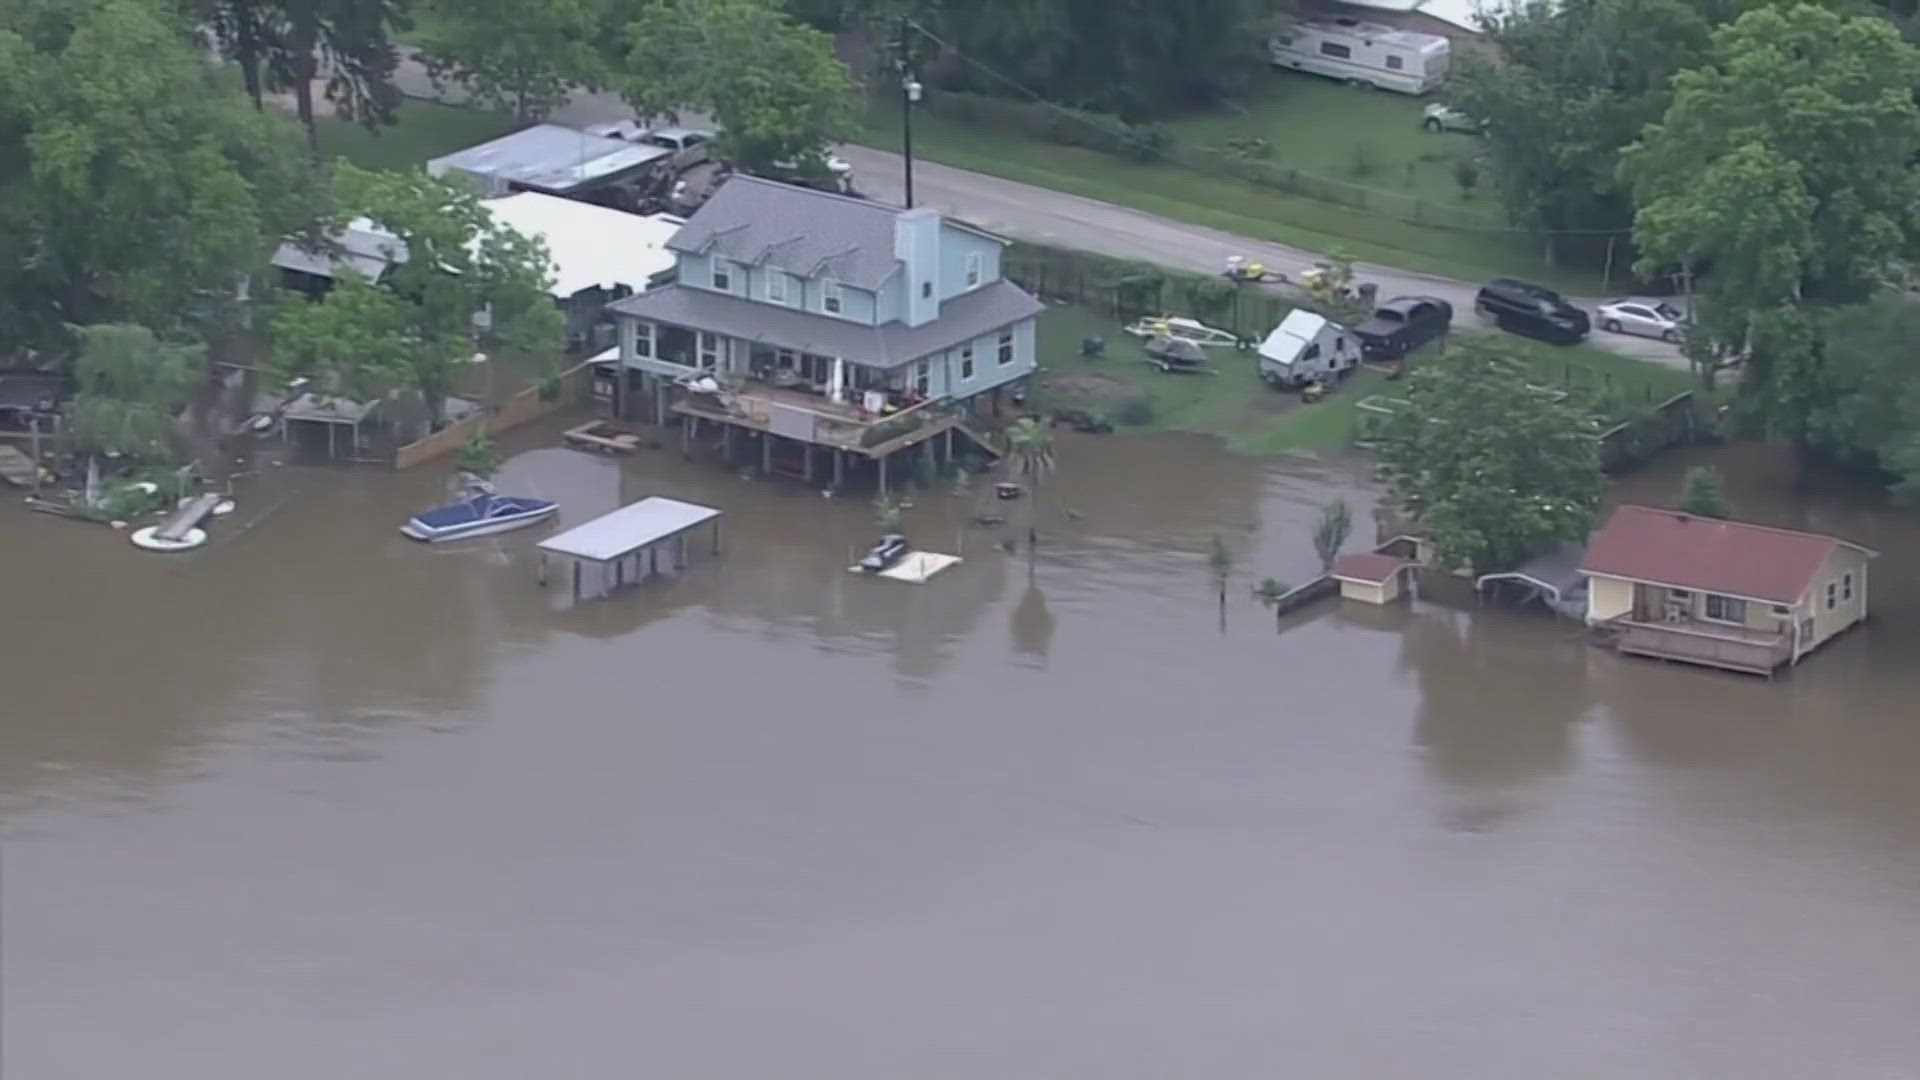 So far, no deaths have been reported as part of the severe flooding in Harris County.